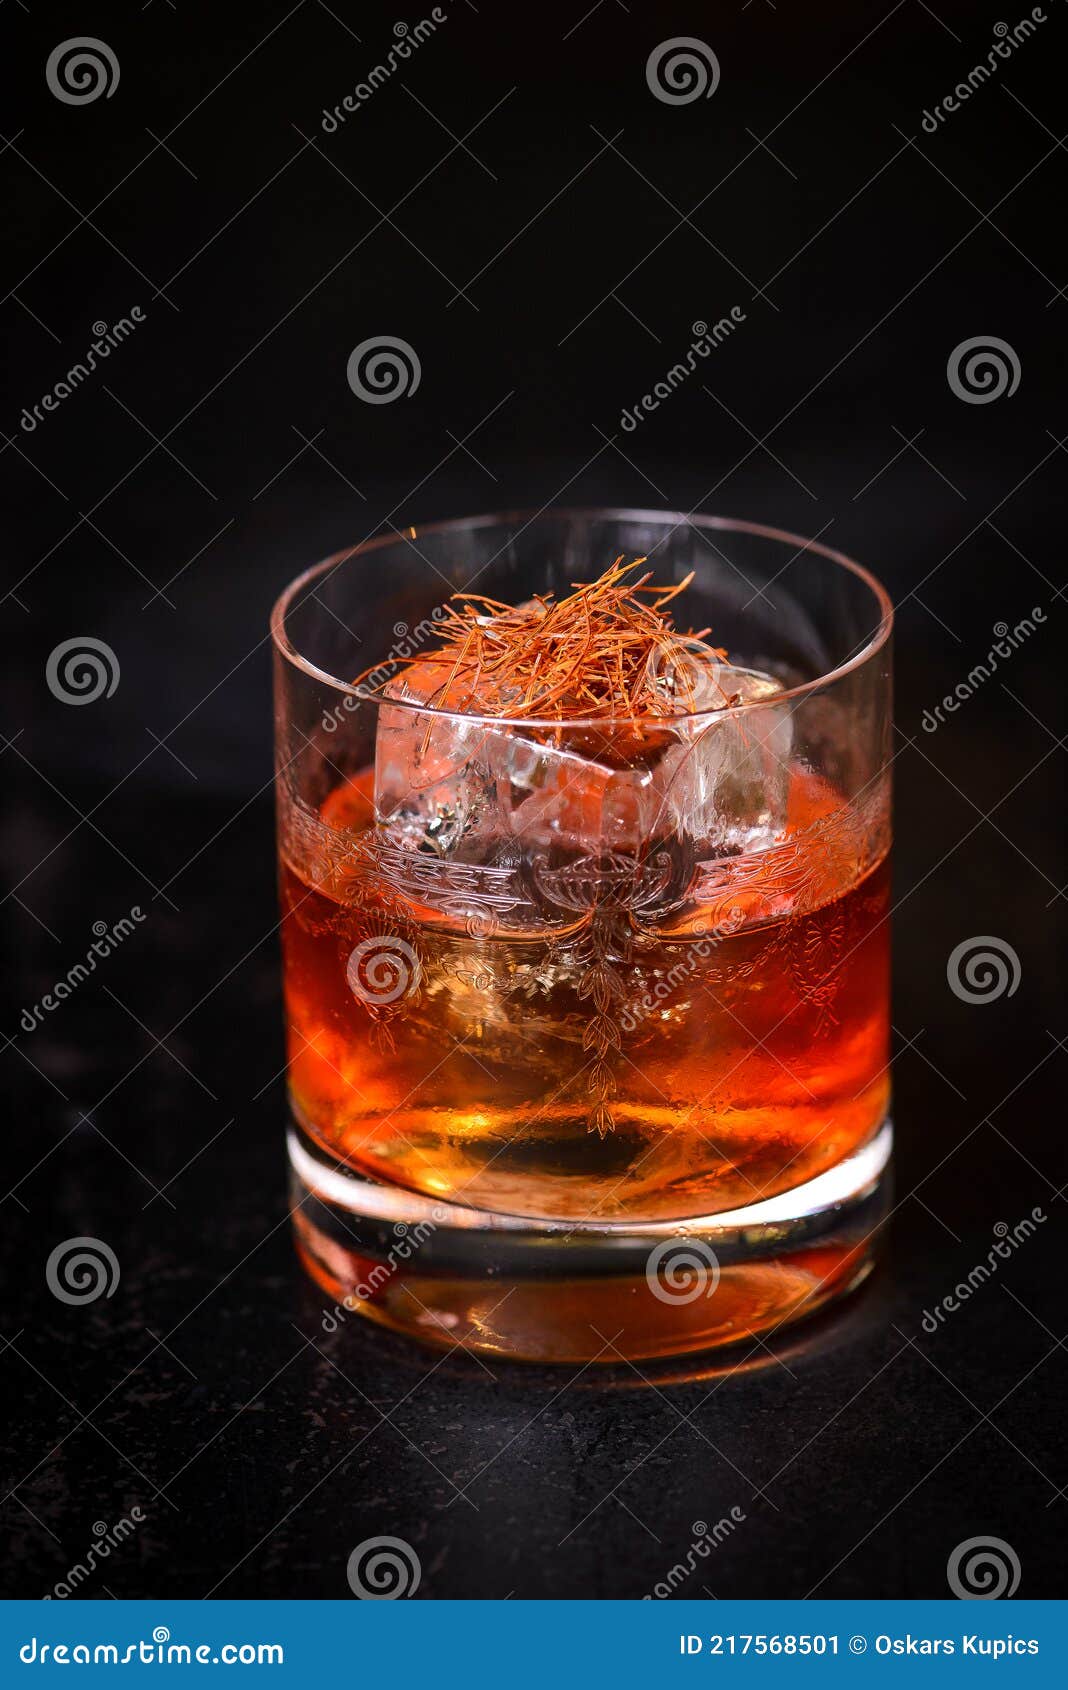 Negroni with Big Ice Cube and Saffron on Top in Vintage Glass Stock Image -  Image of vintage, whiskey: 217568501